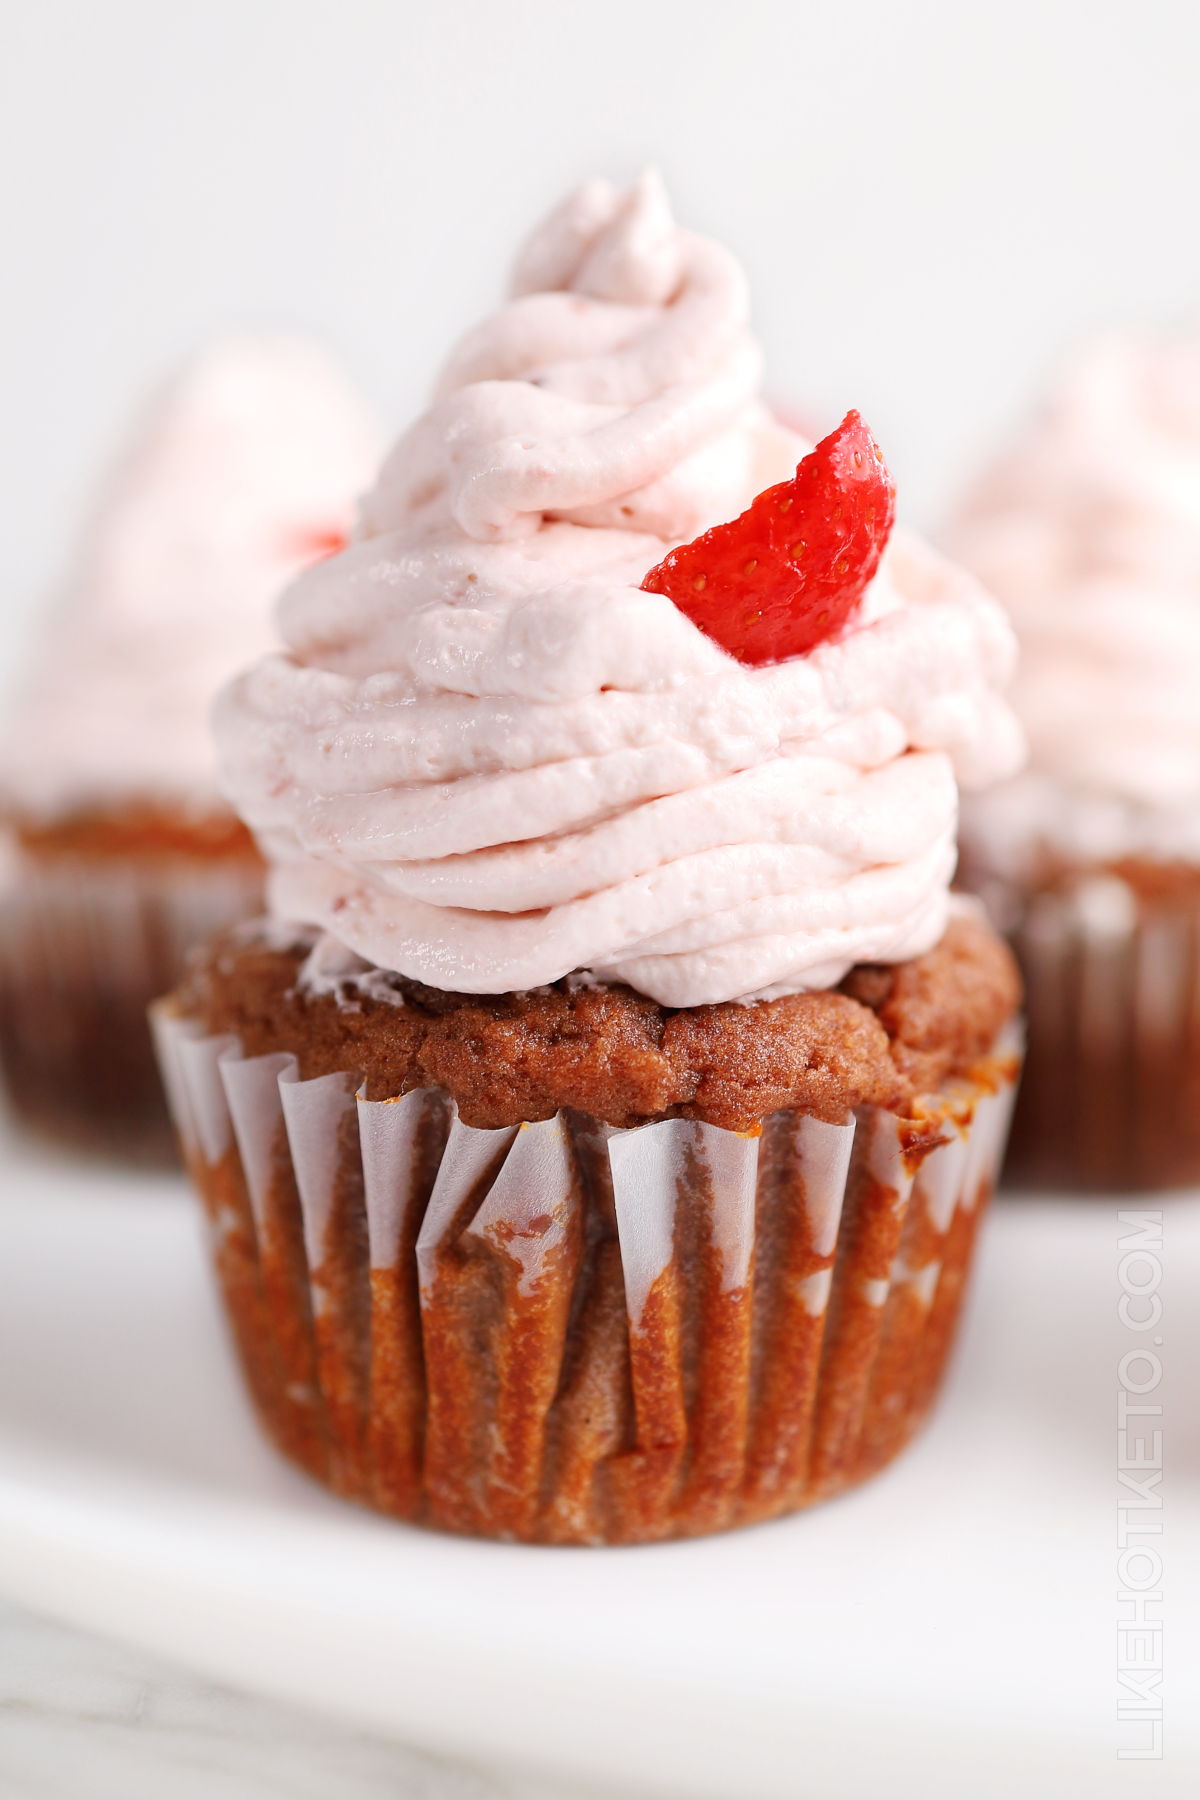 Keto strawberry cupcake with a tall pink strawberry frosting.